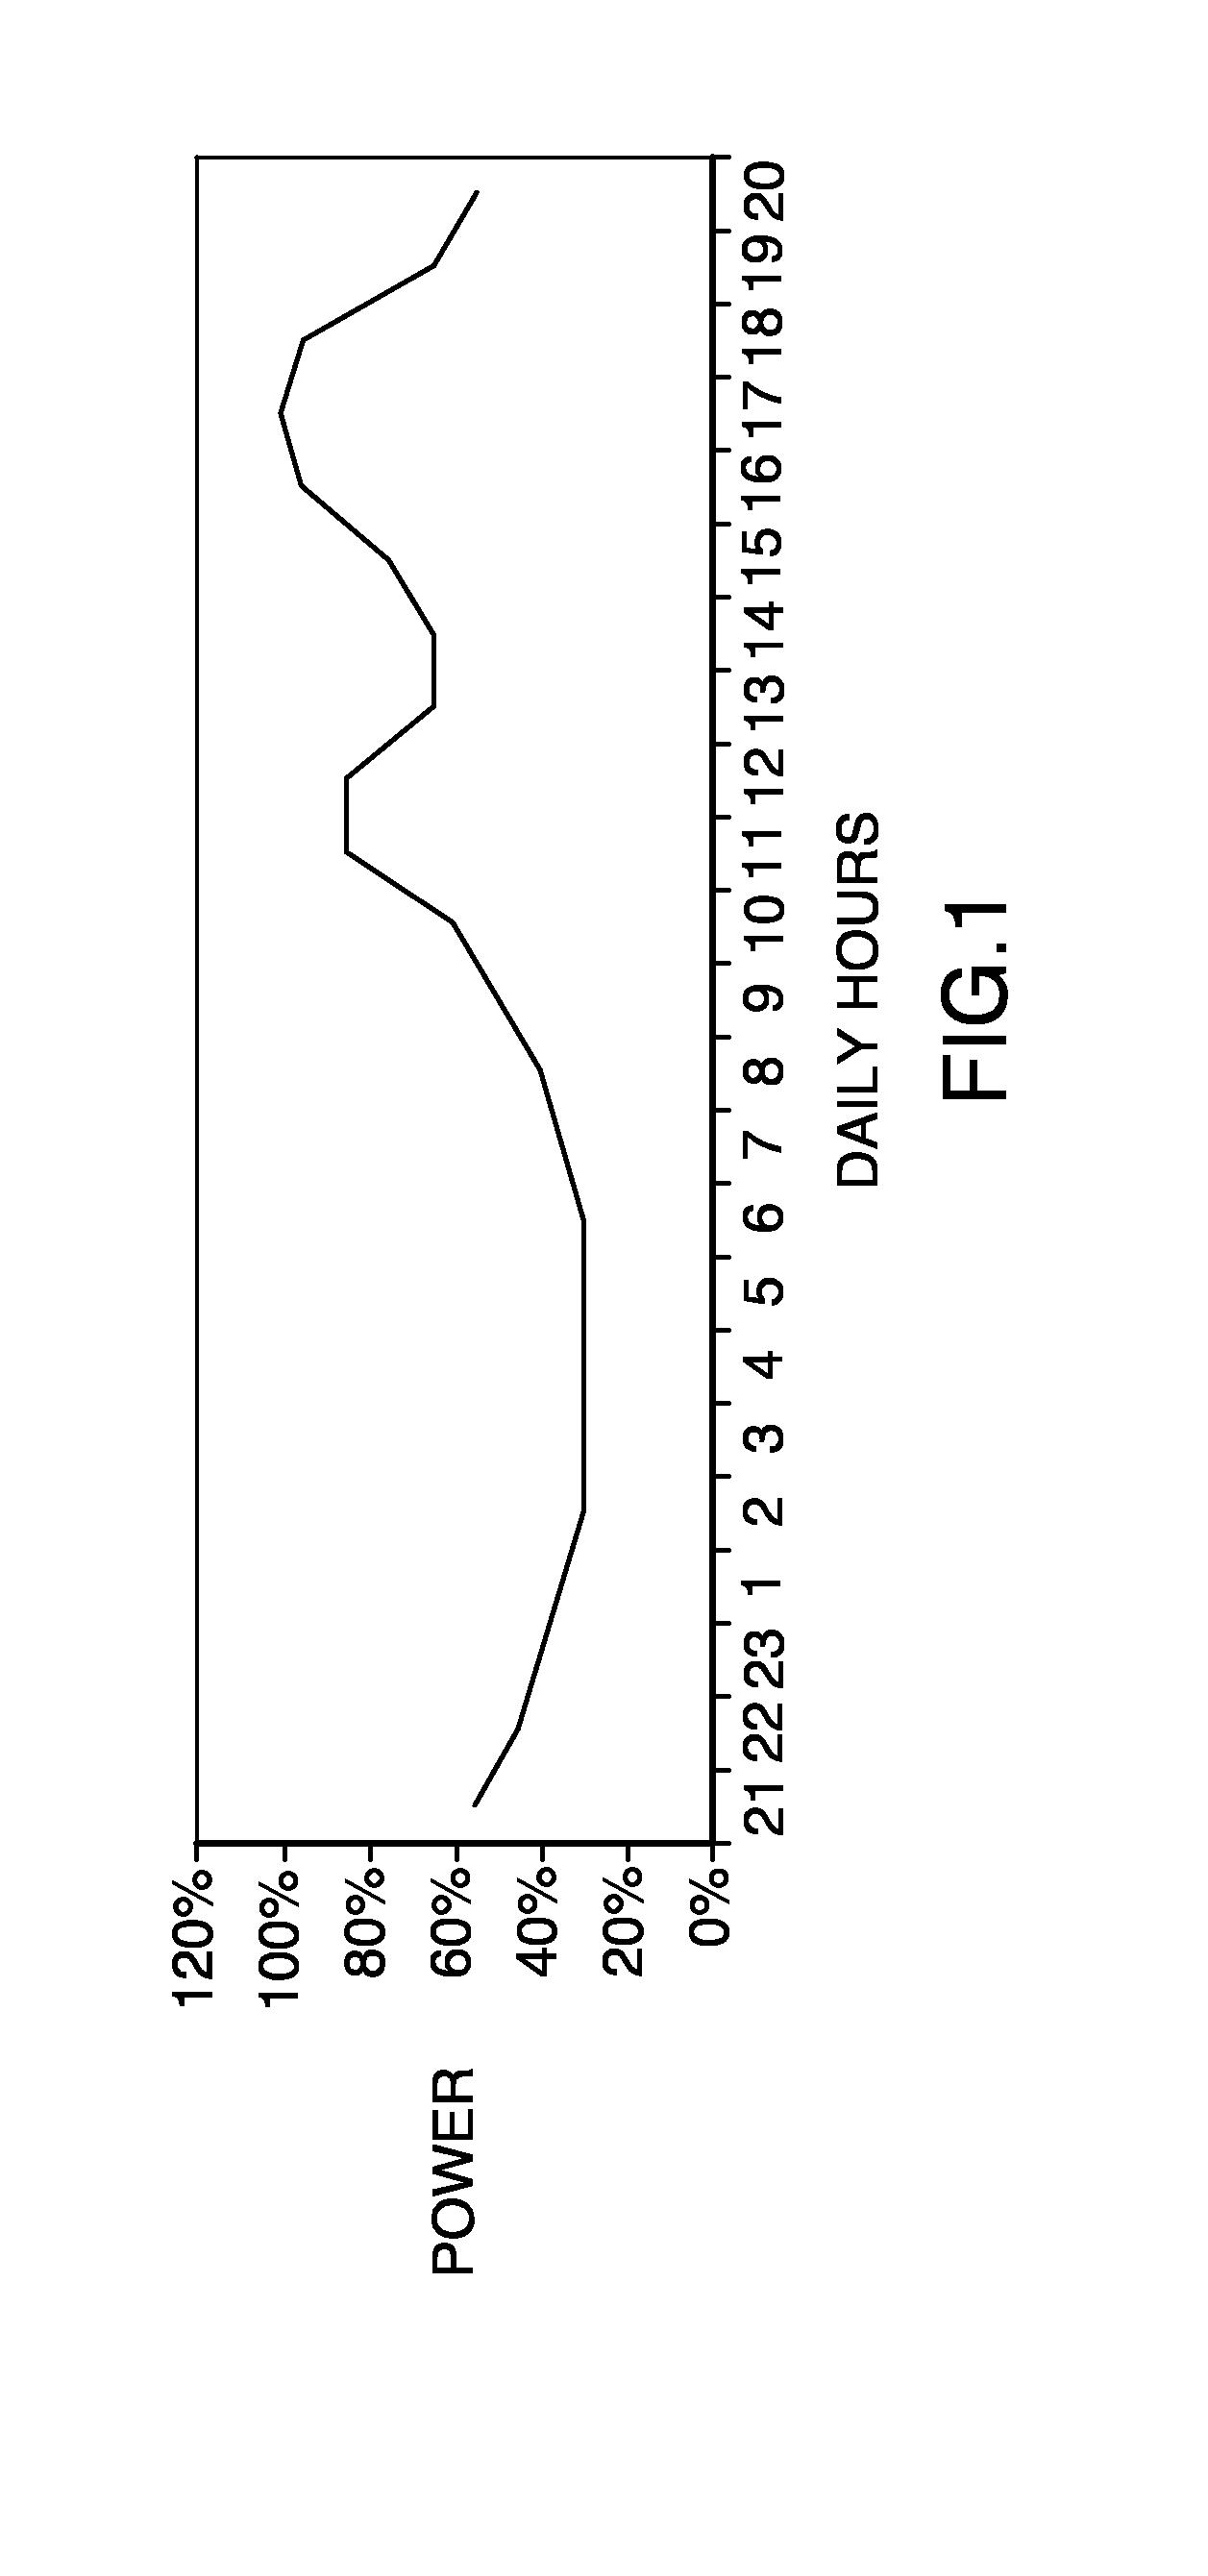 Energy storage system and method